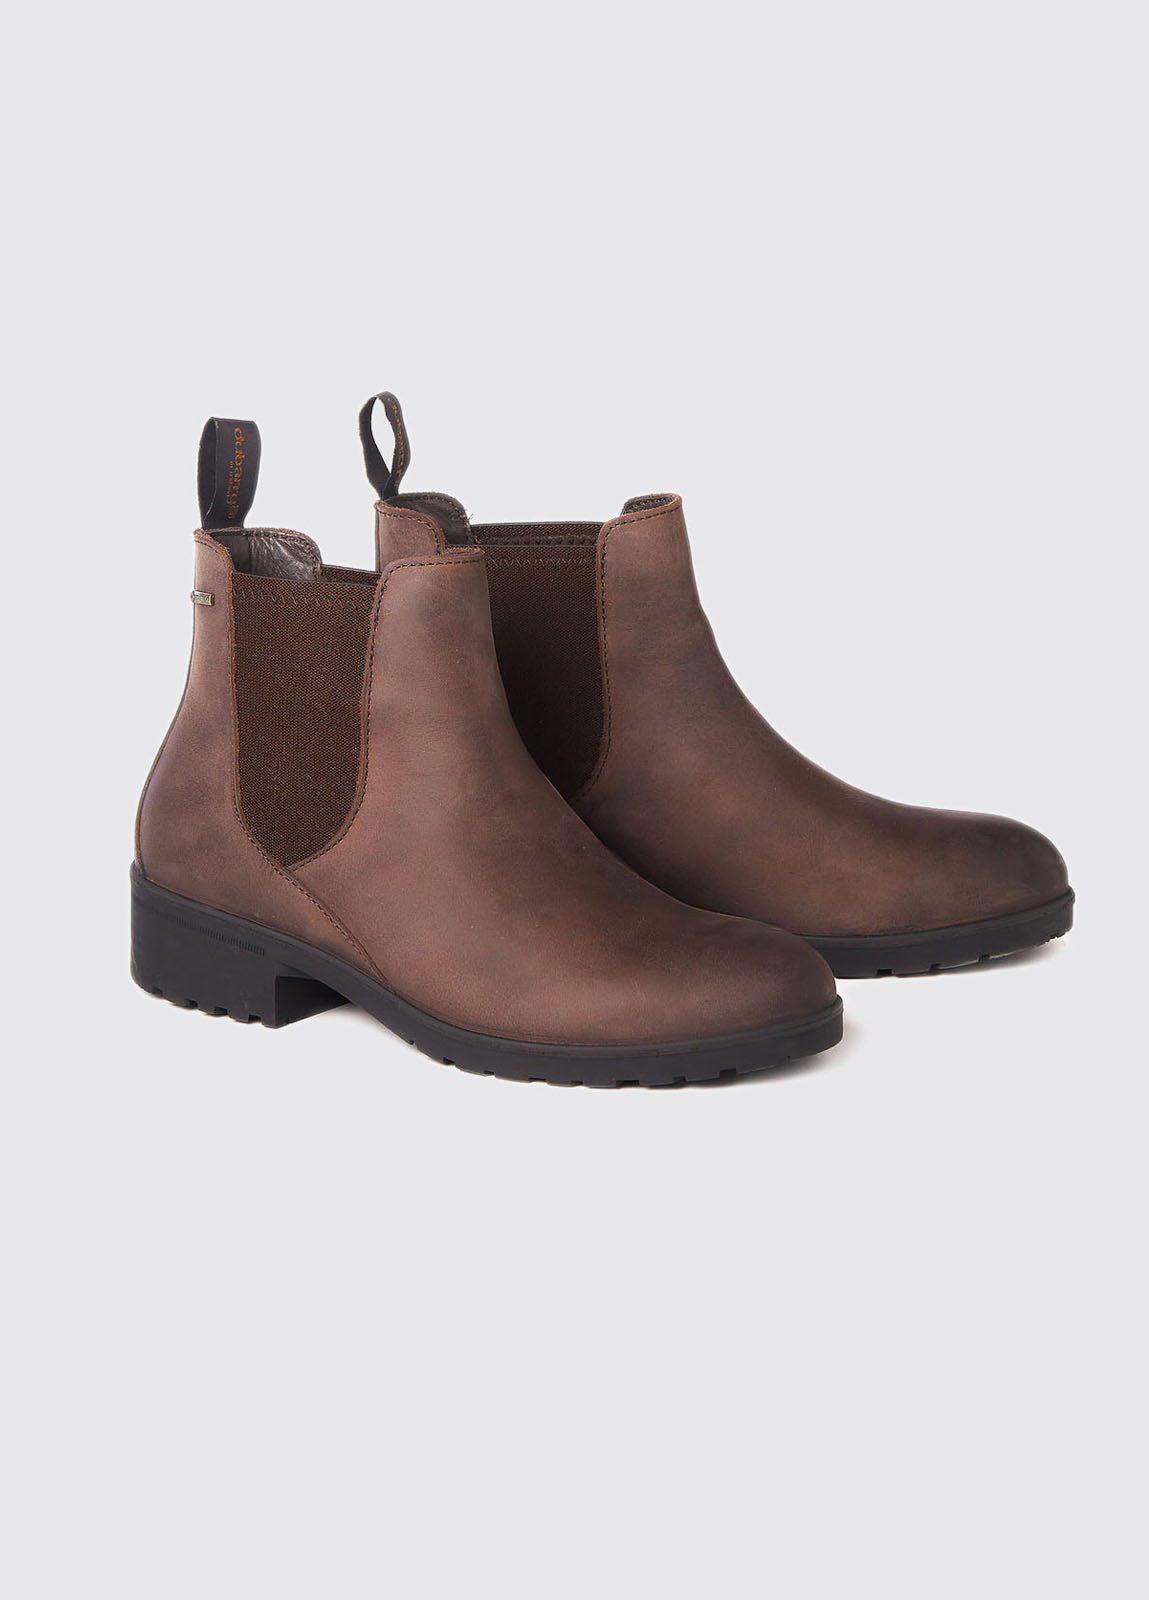 Dubarry of Ireland Chelsea Boot Waterford